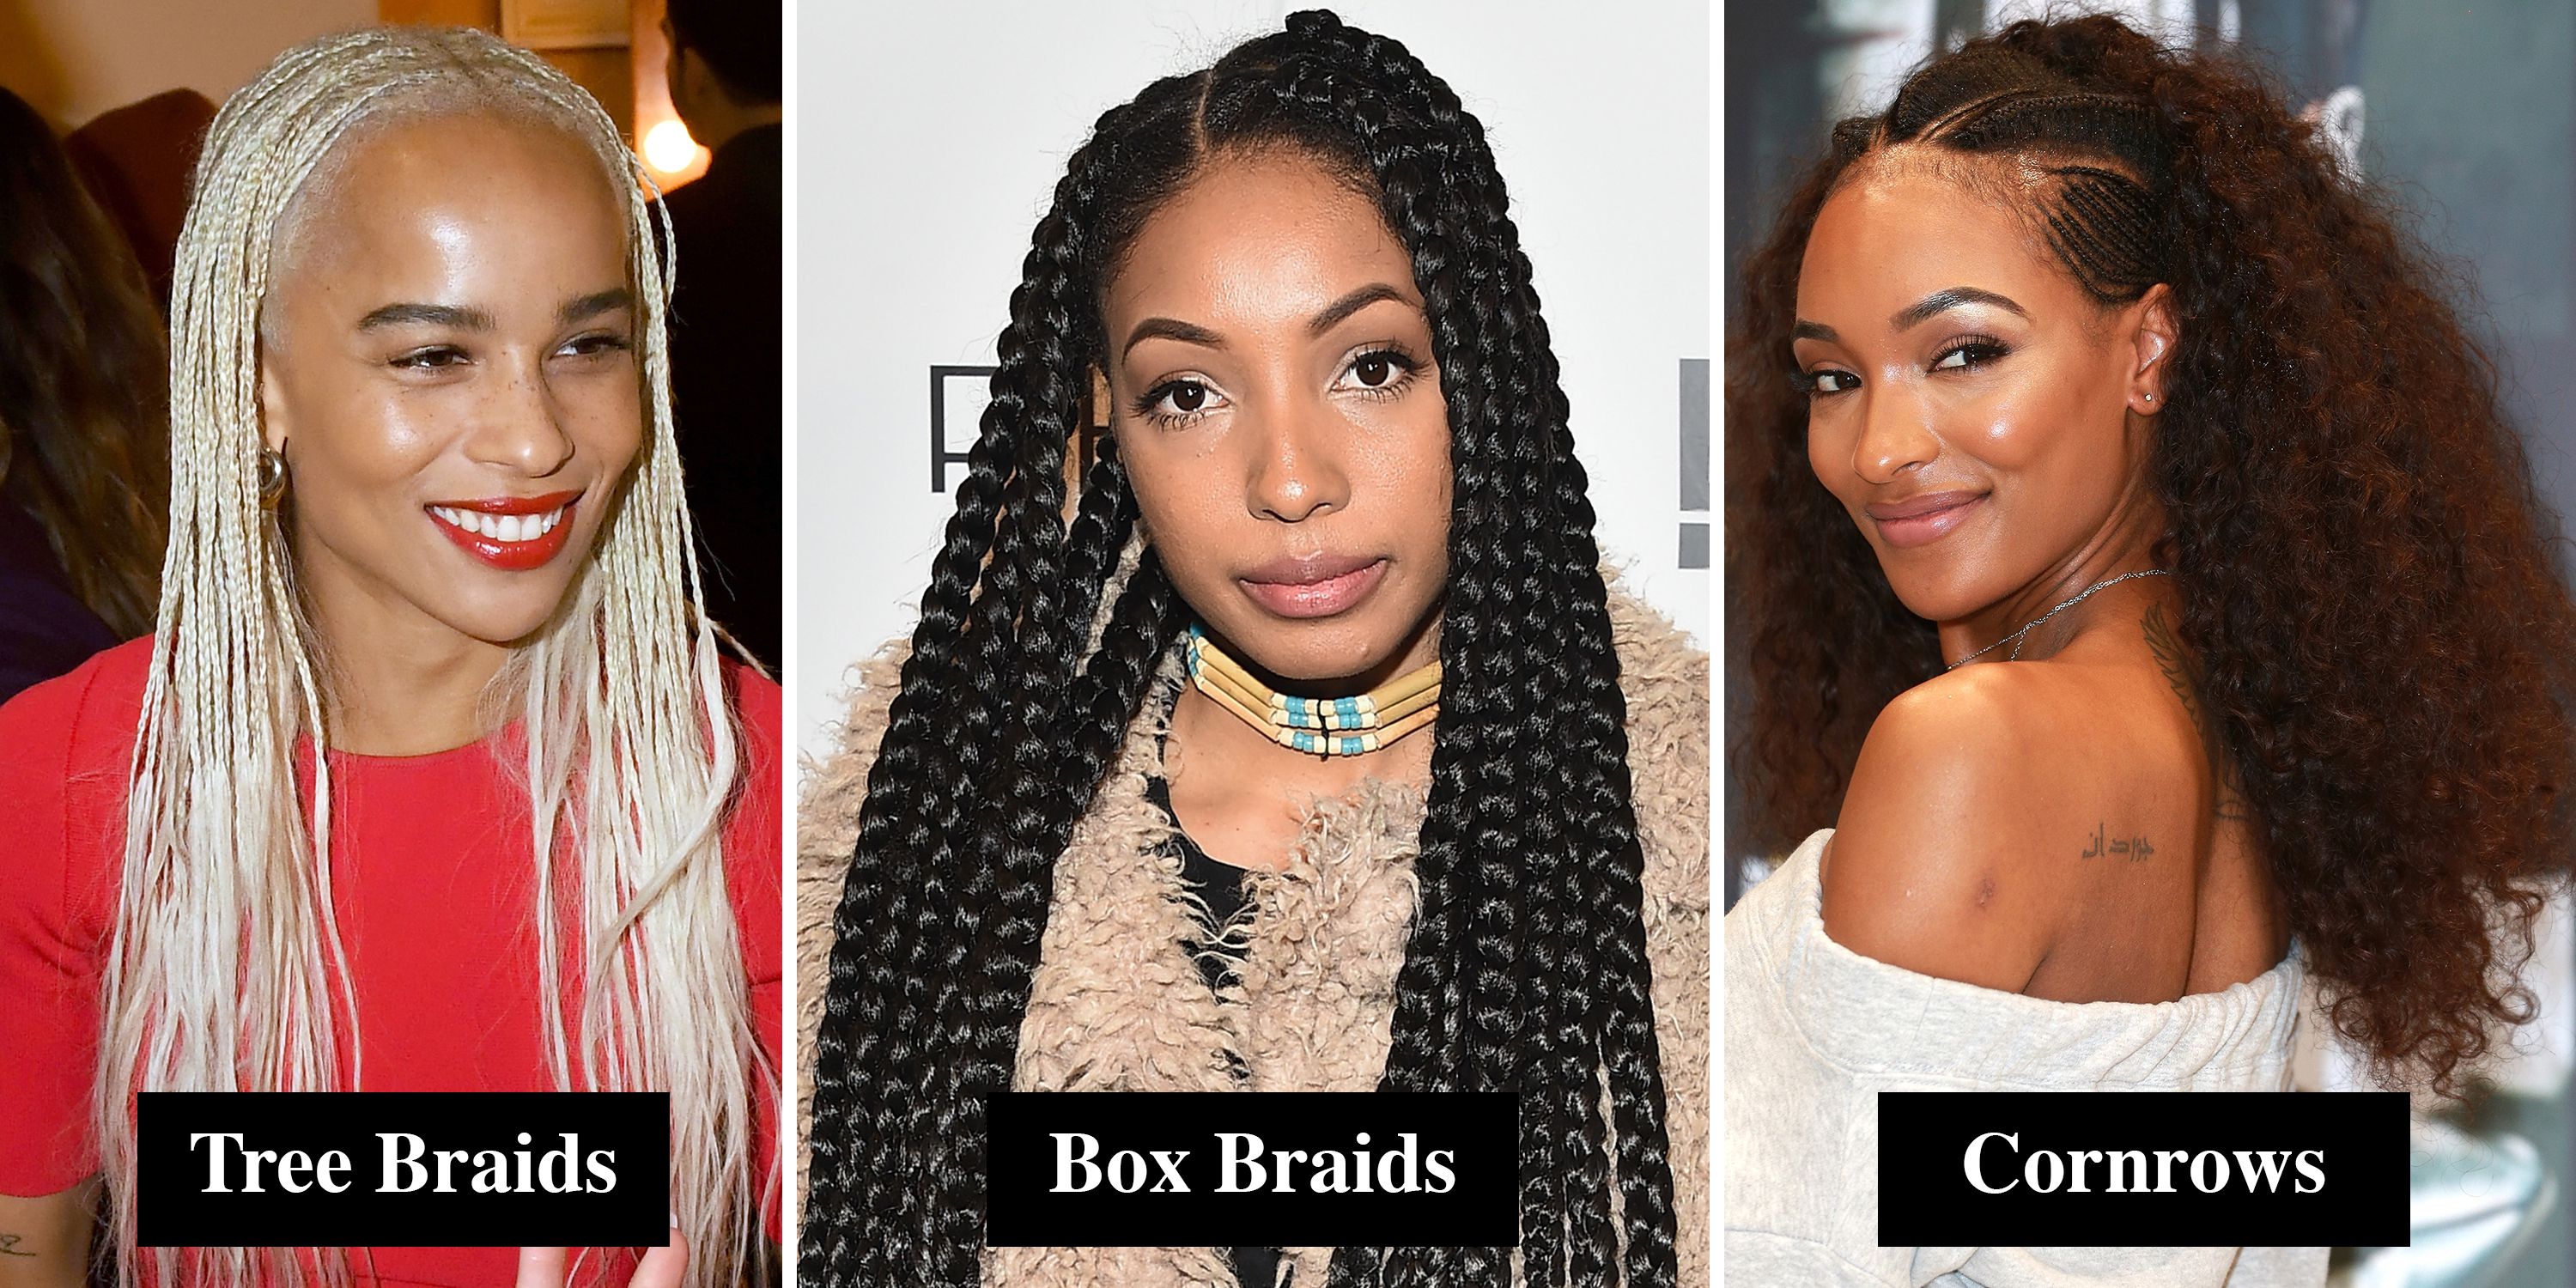 Braids and Twists 2019 - 14 hairstyles from crochet and box braids